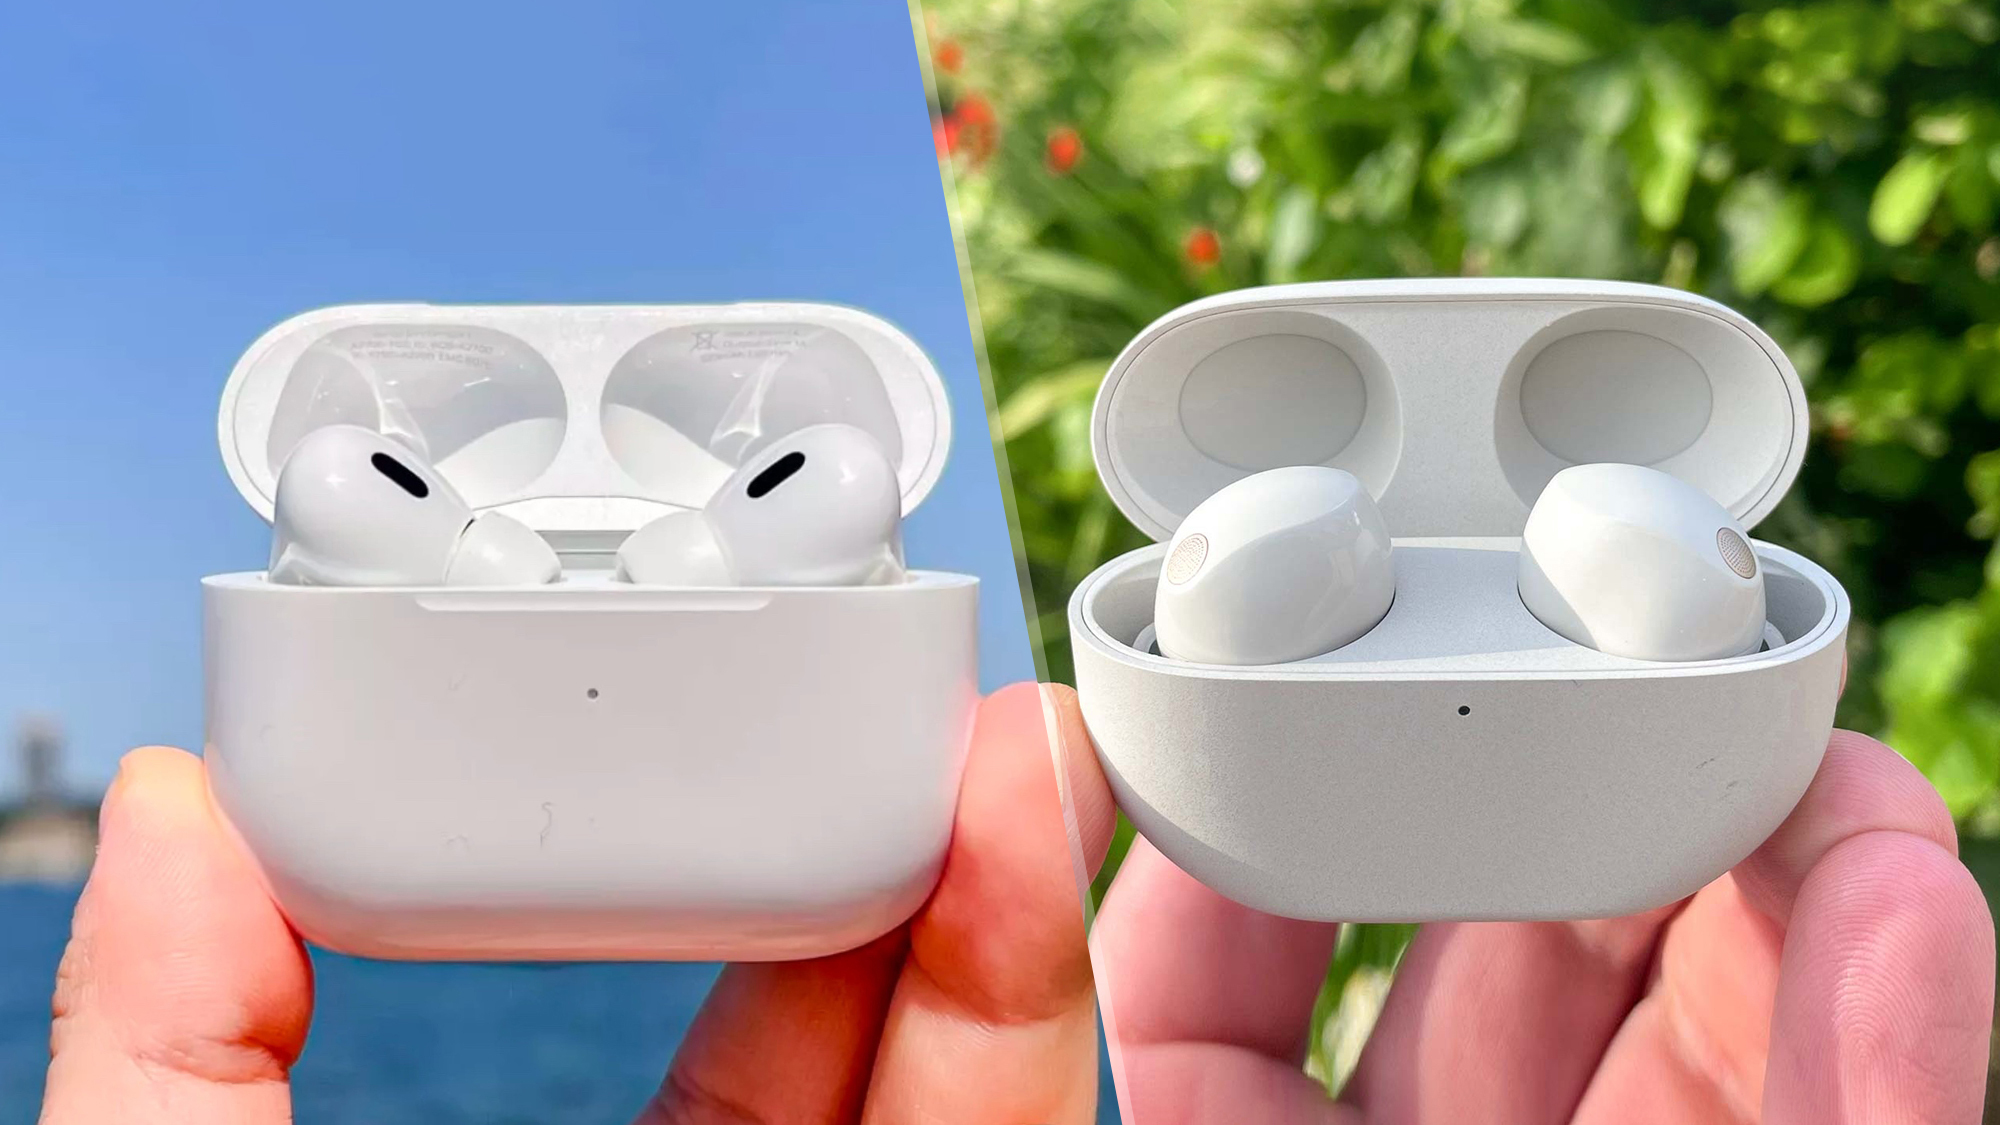 New AirPods Pro 2 with USB-C vs AirPods Pro 2 - specs, cost